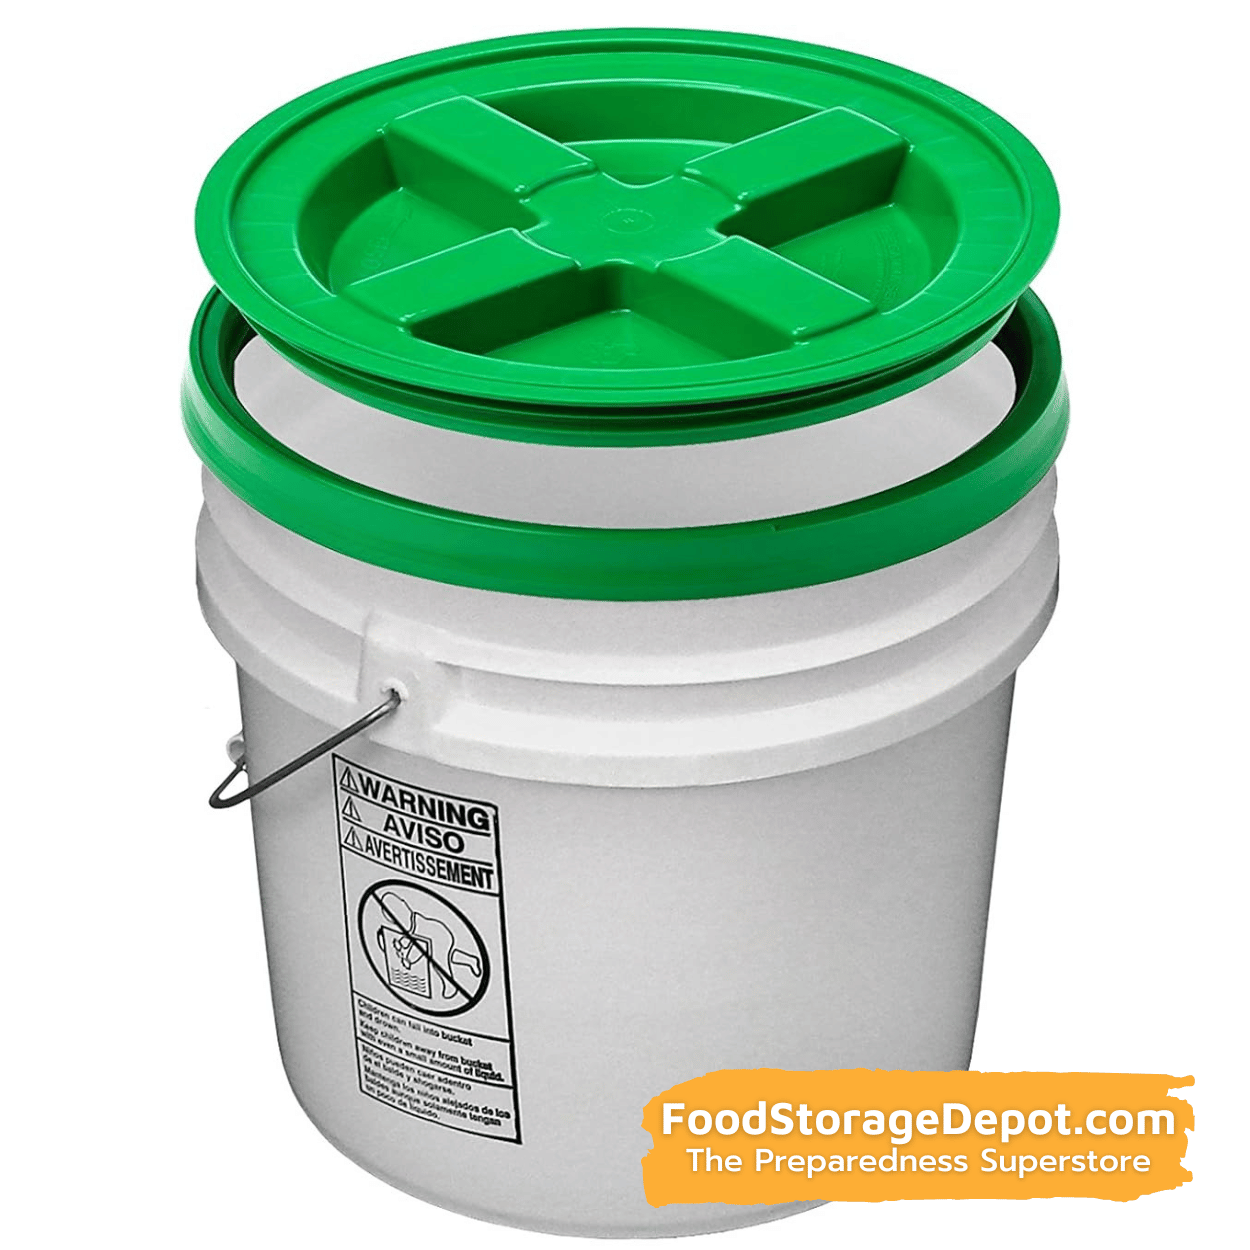 Reusable Twist Lid for Storage Container Bucket - 5 Gallon